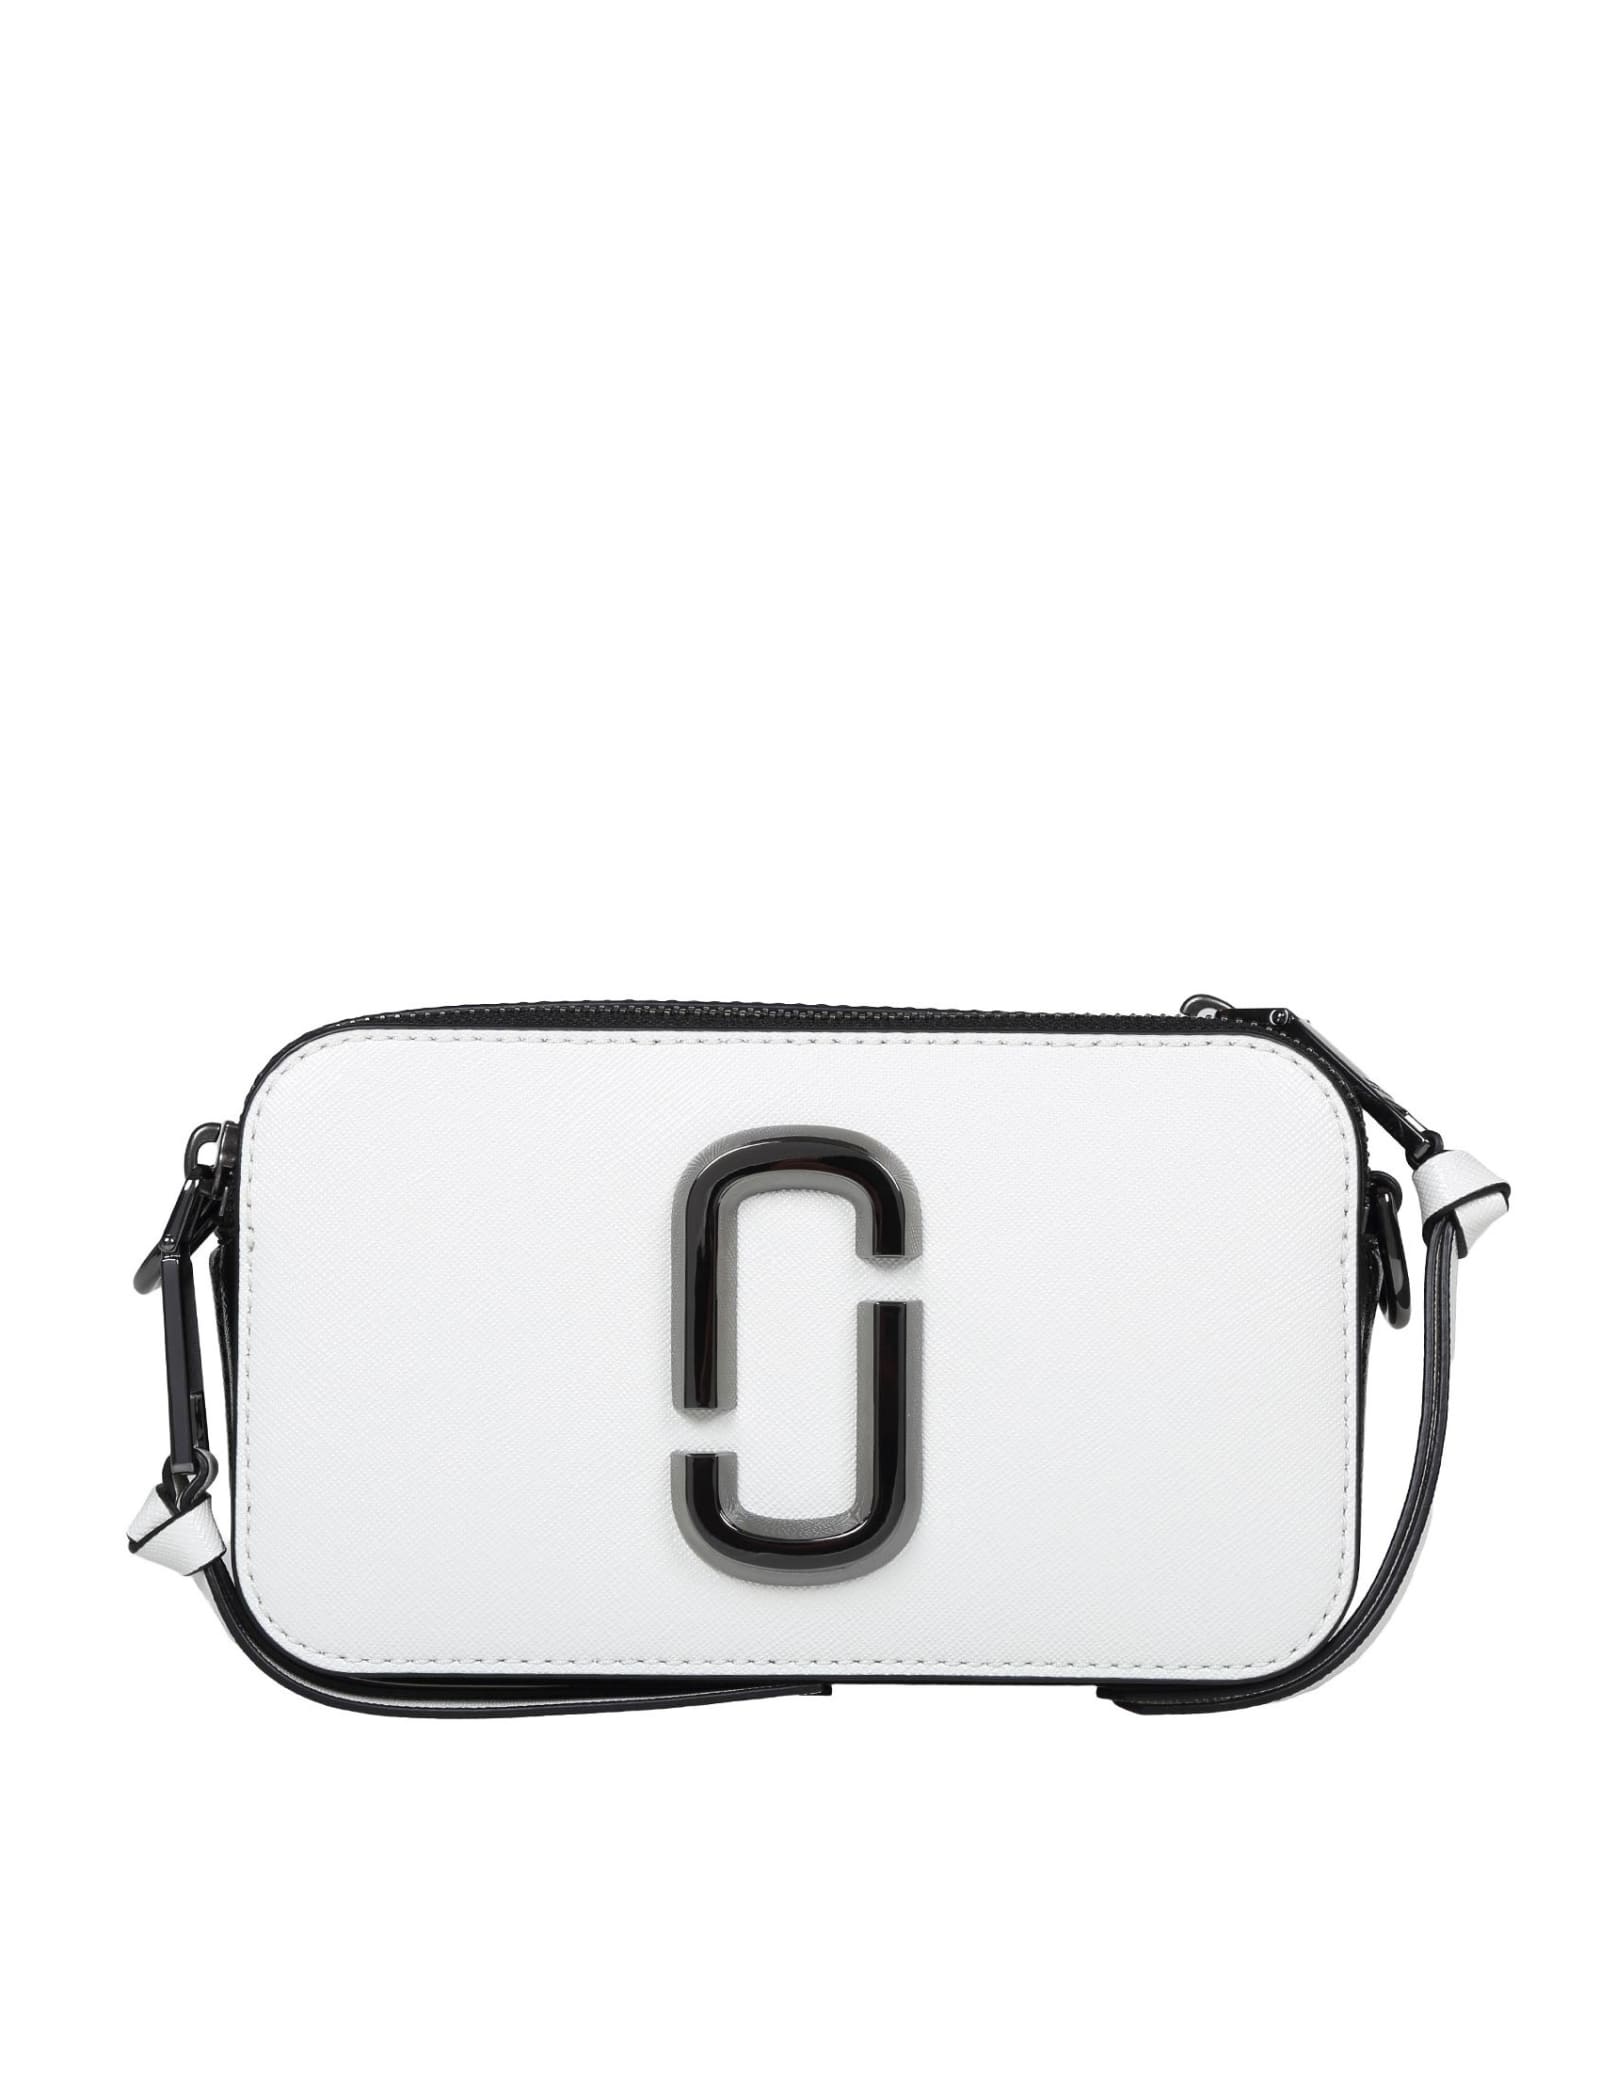 Marc Jacobs Snapshot Bag In Black Leather In Black/white